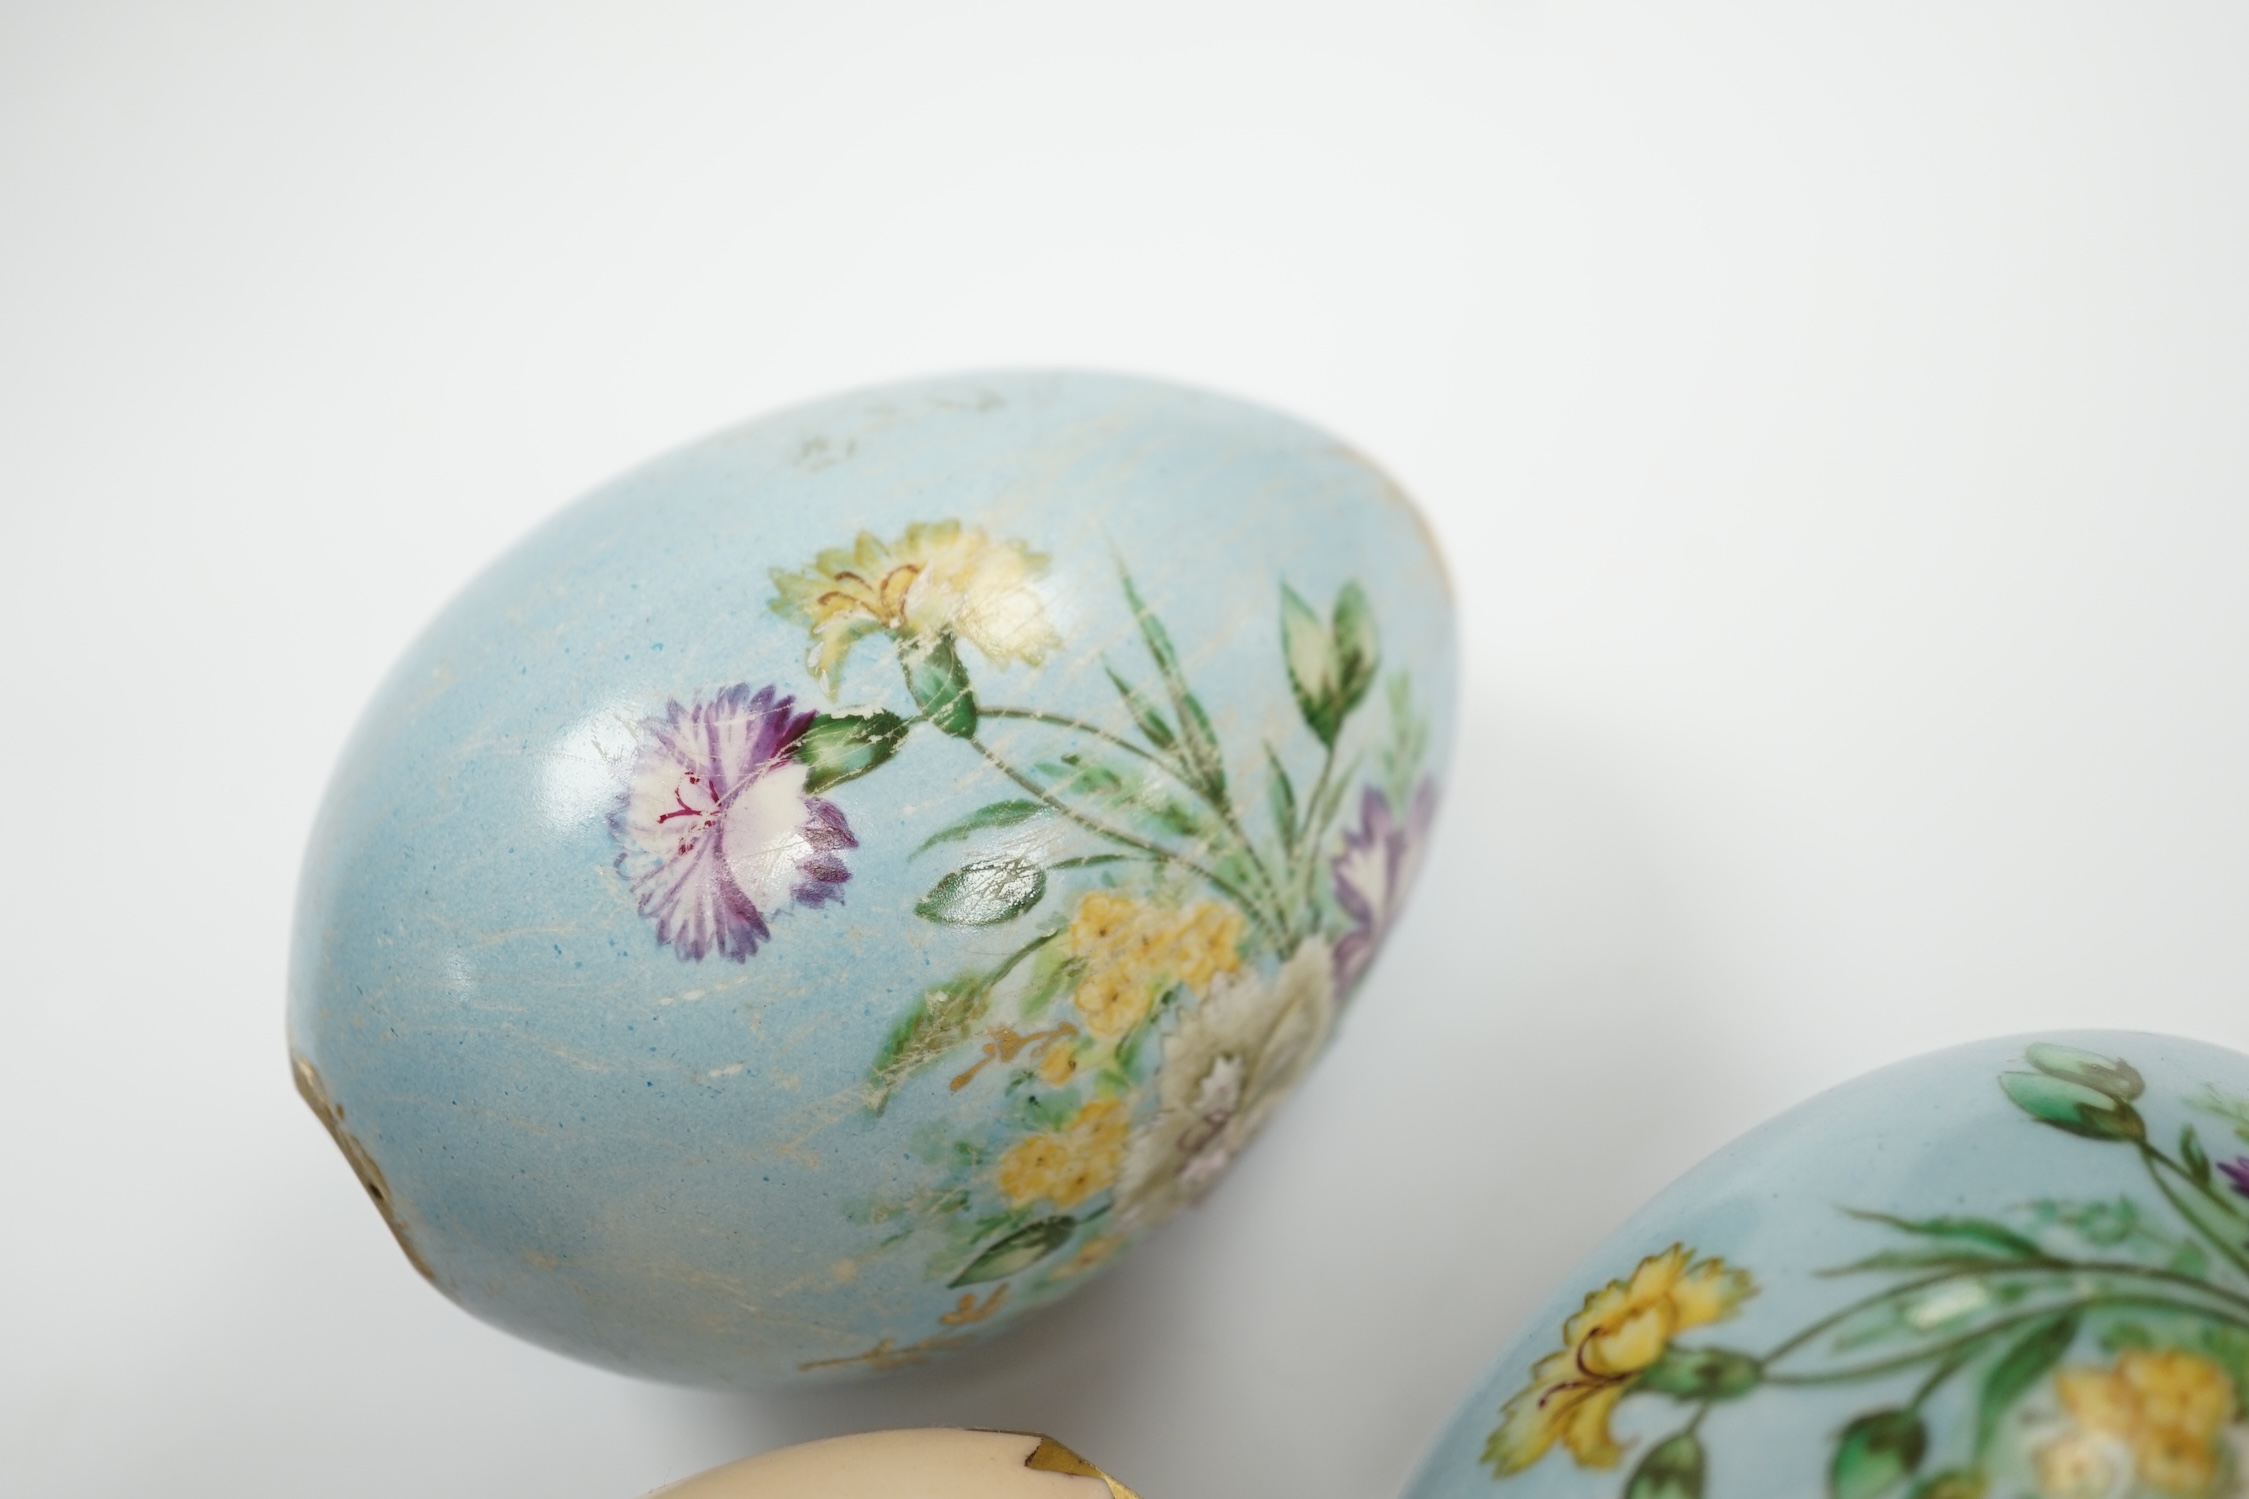 Four Russian porcelain Easter eggs, 19th century, 11cm high - Image 2 of 5